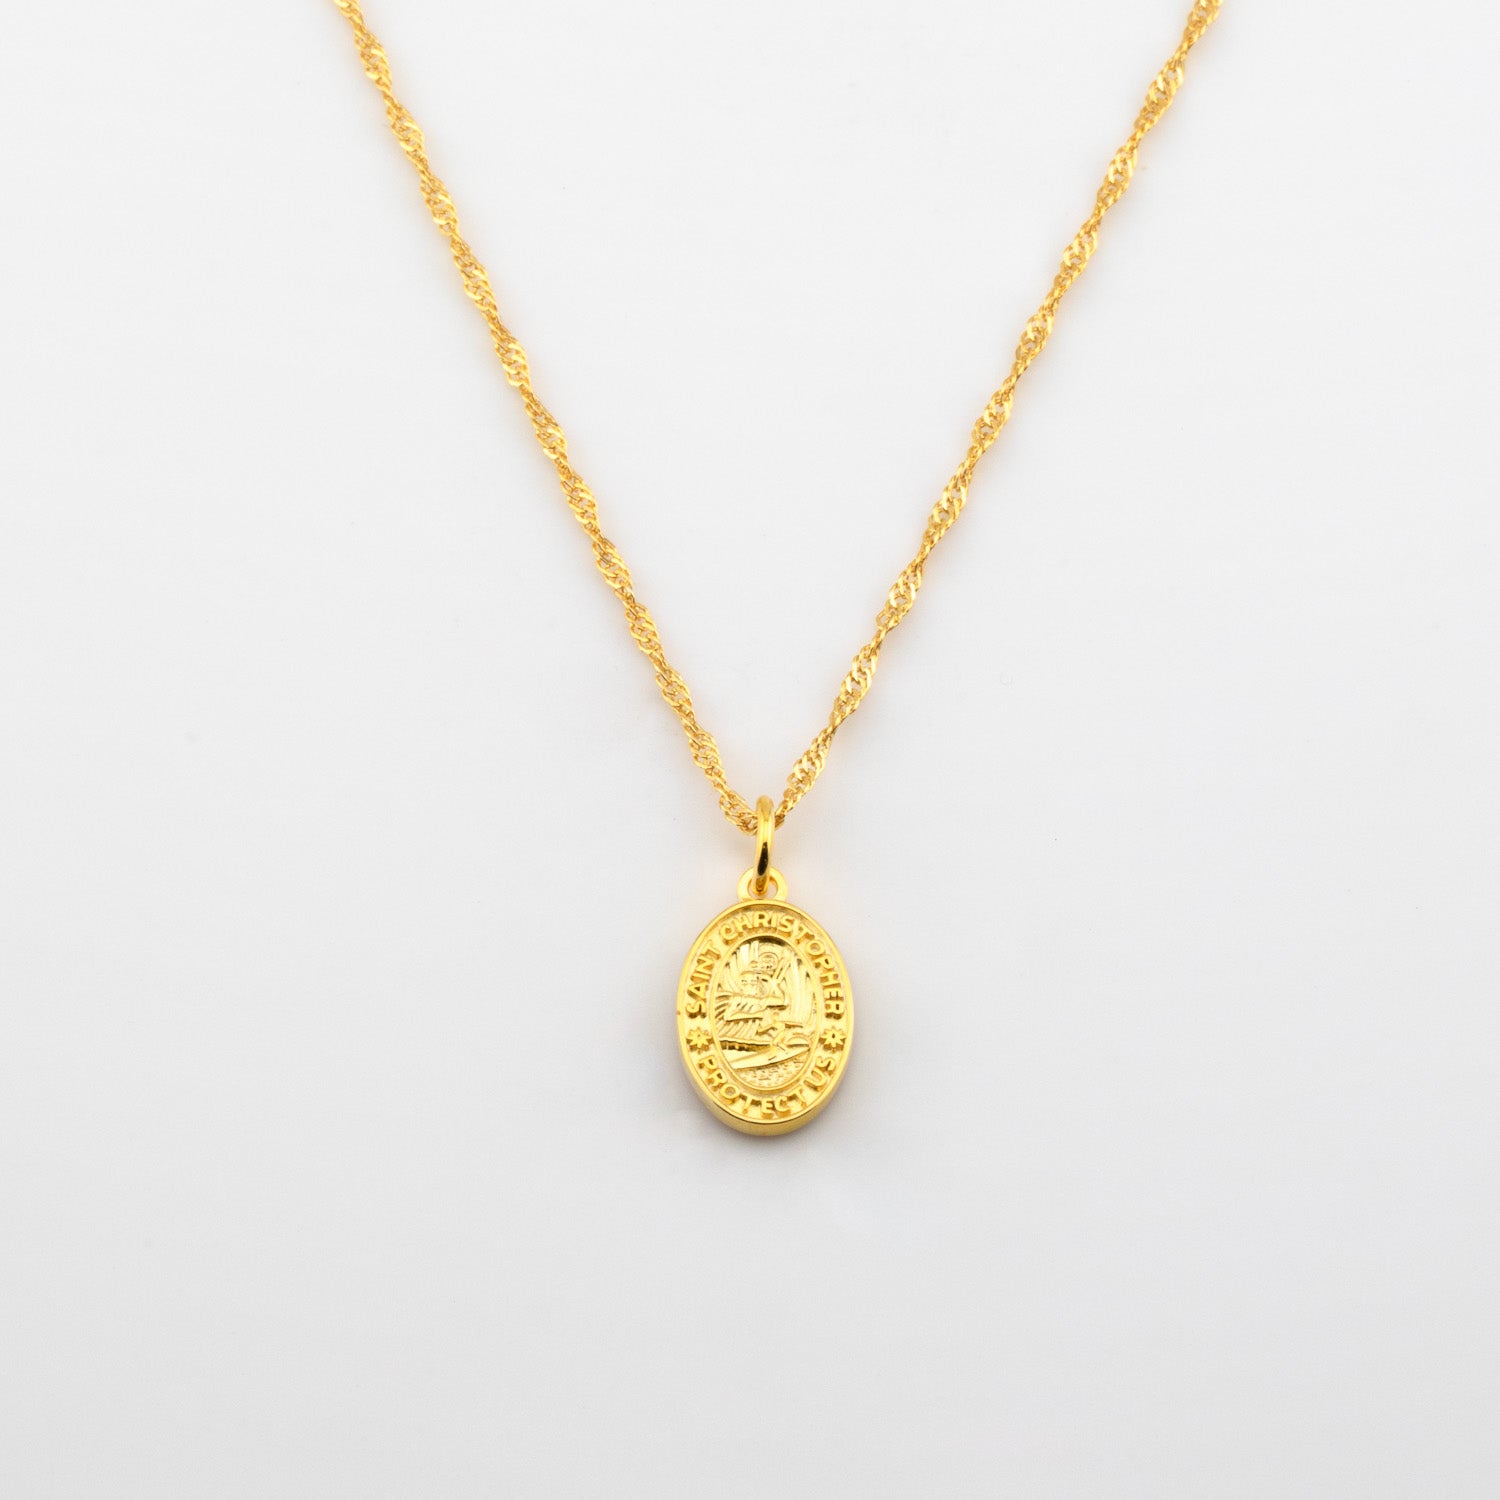 Red / Gold Oval St. Christopher Necklace